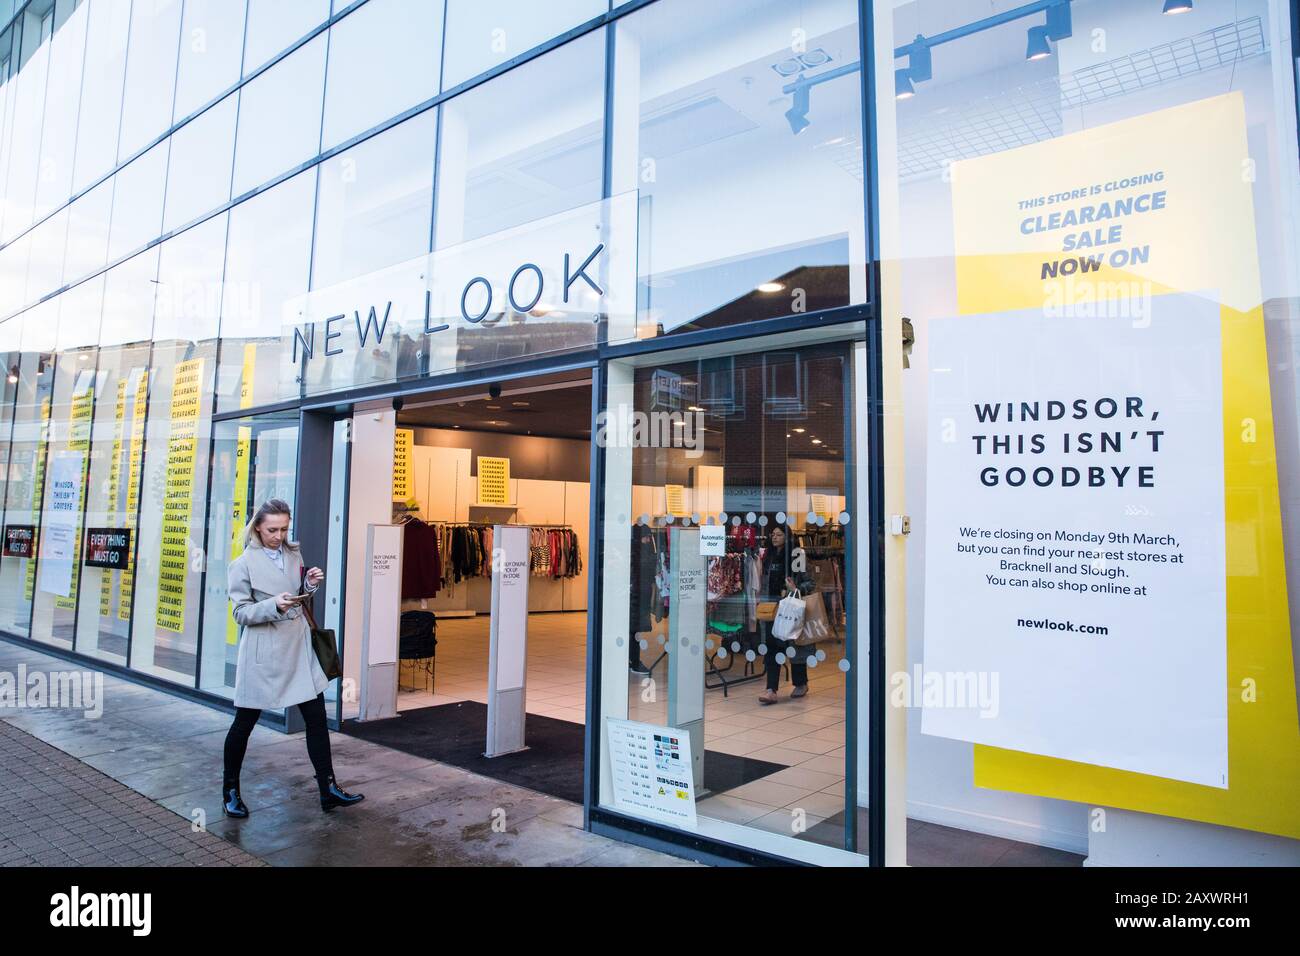 Windsor, UK. 13 February, 2020. A New Look store in Windsor Yards, a  shopping area in the heart of the historic town, displays closing down  notices. A nearby Topshop store is also